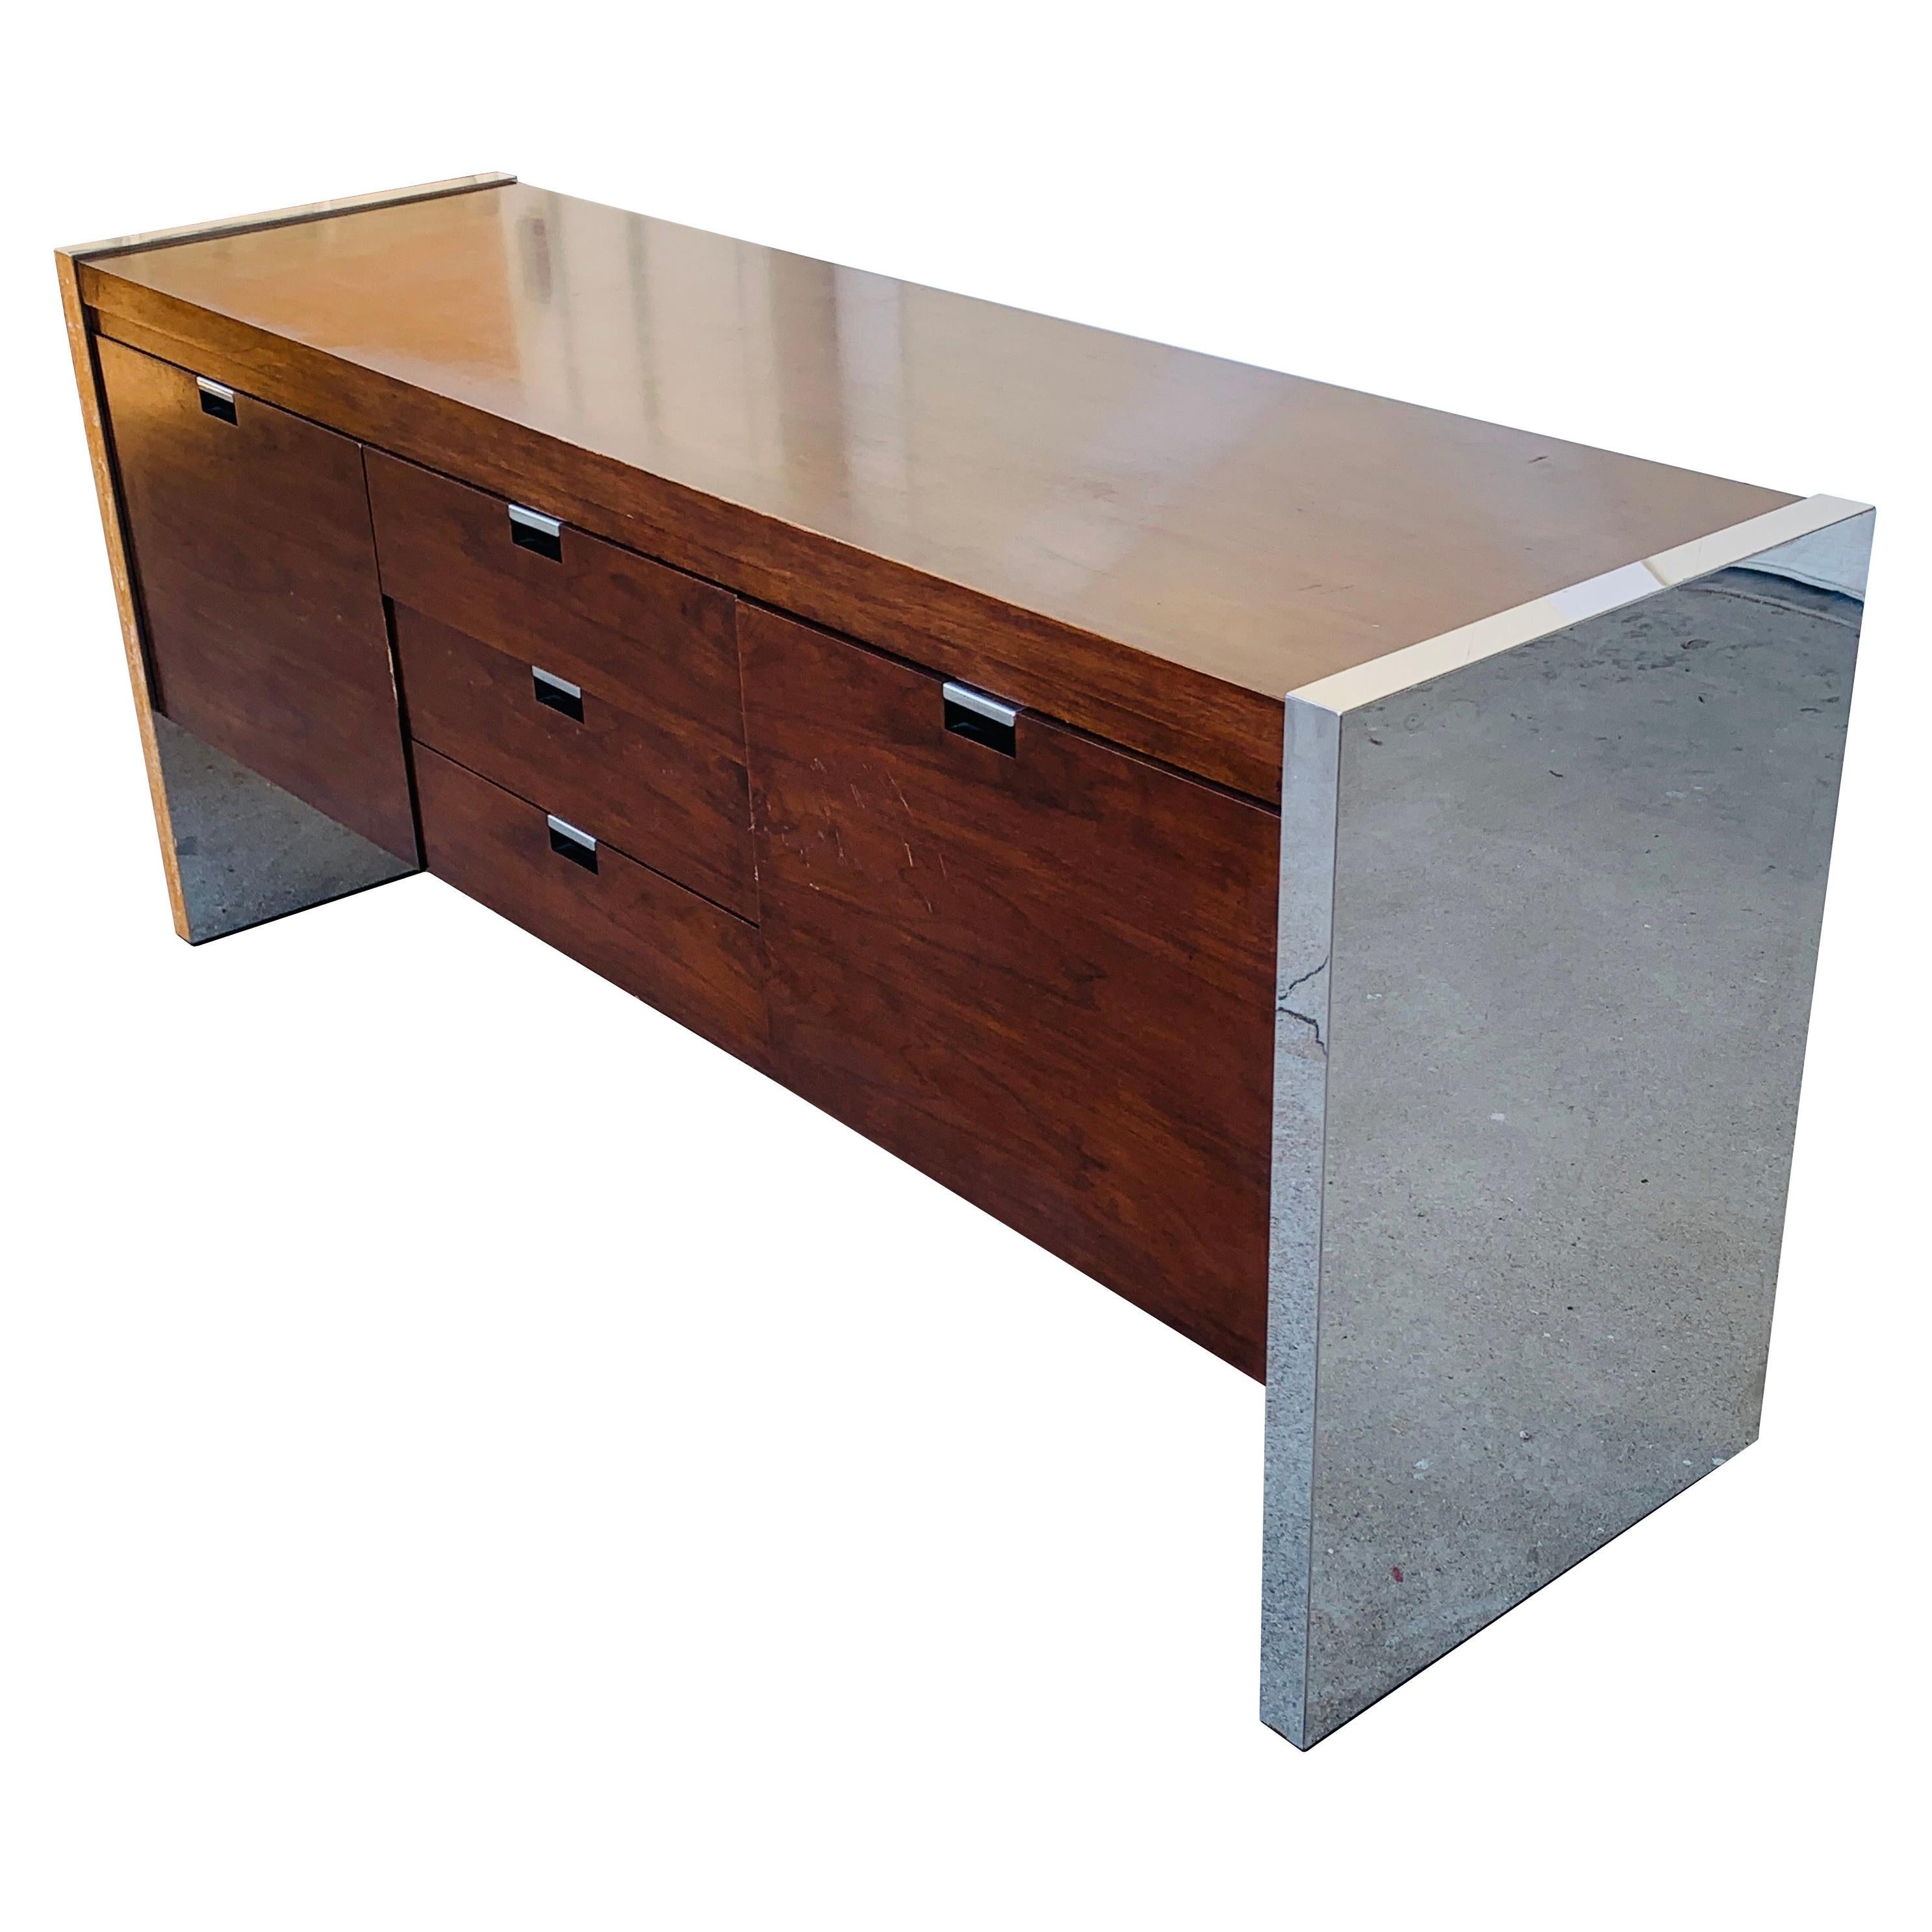 Rosewood & Stainless Credenza by Roger Sprunger/Dunbar